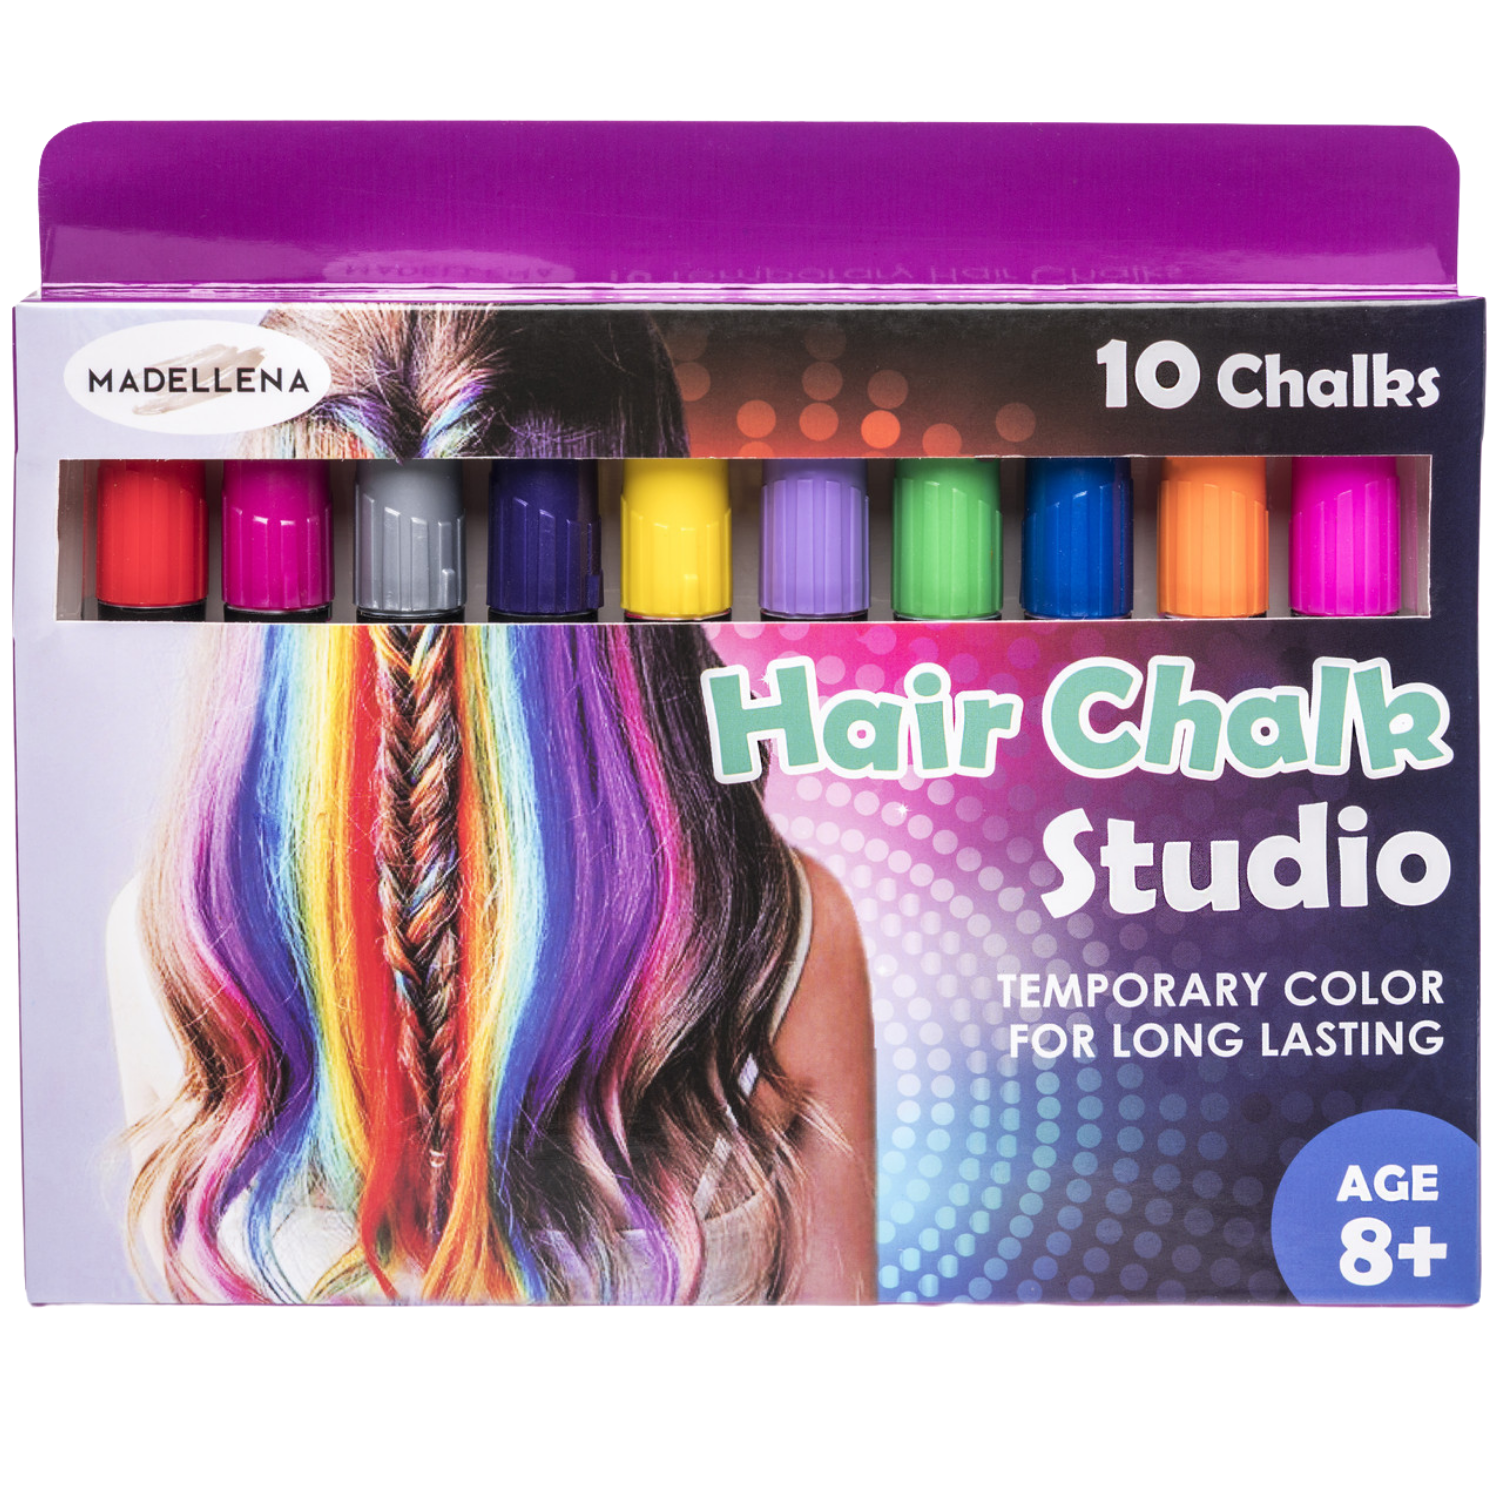 Hair Chalk For Kids - Hair Chalk for Girls - 10 Piece Temporary Hair Chalks - Birthday Gifts For Girls - Hair Chalk - Kids Hair Dye - Hair Chalk Set, Gifts for Girls Ages 3, 4, 5, 6 ,7, 8, 9, 10 - image 3 of 5